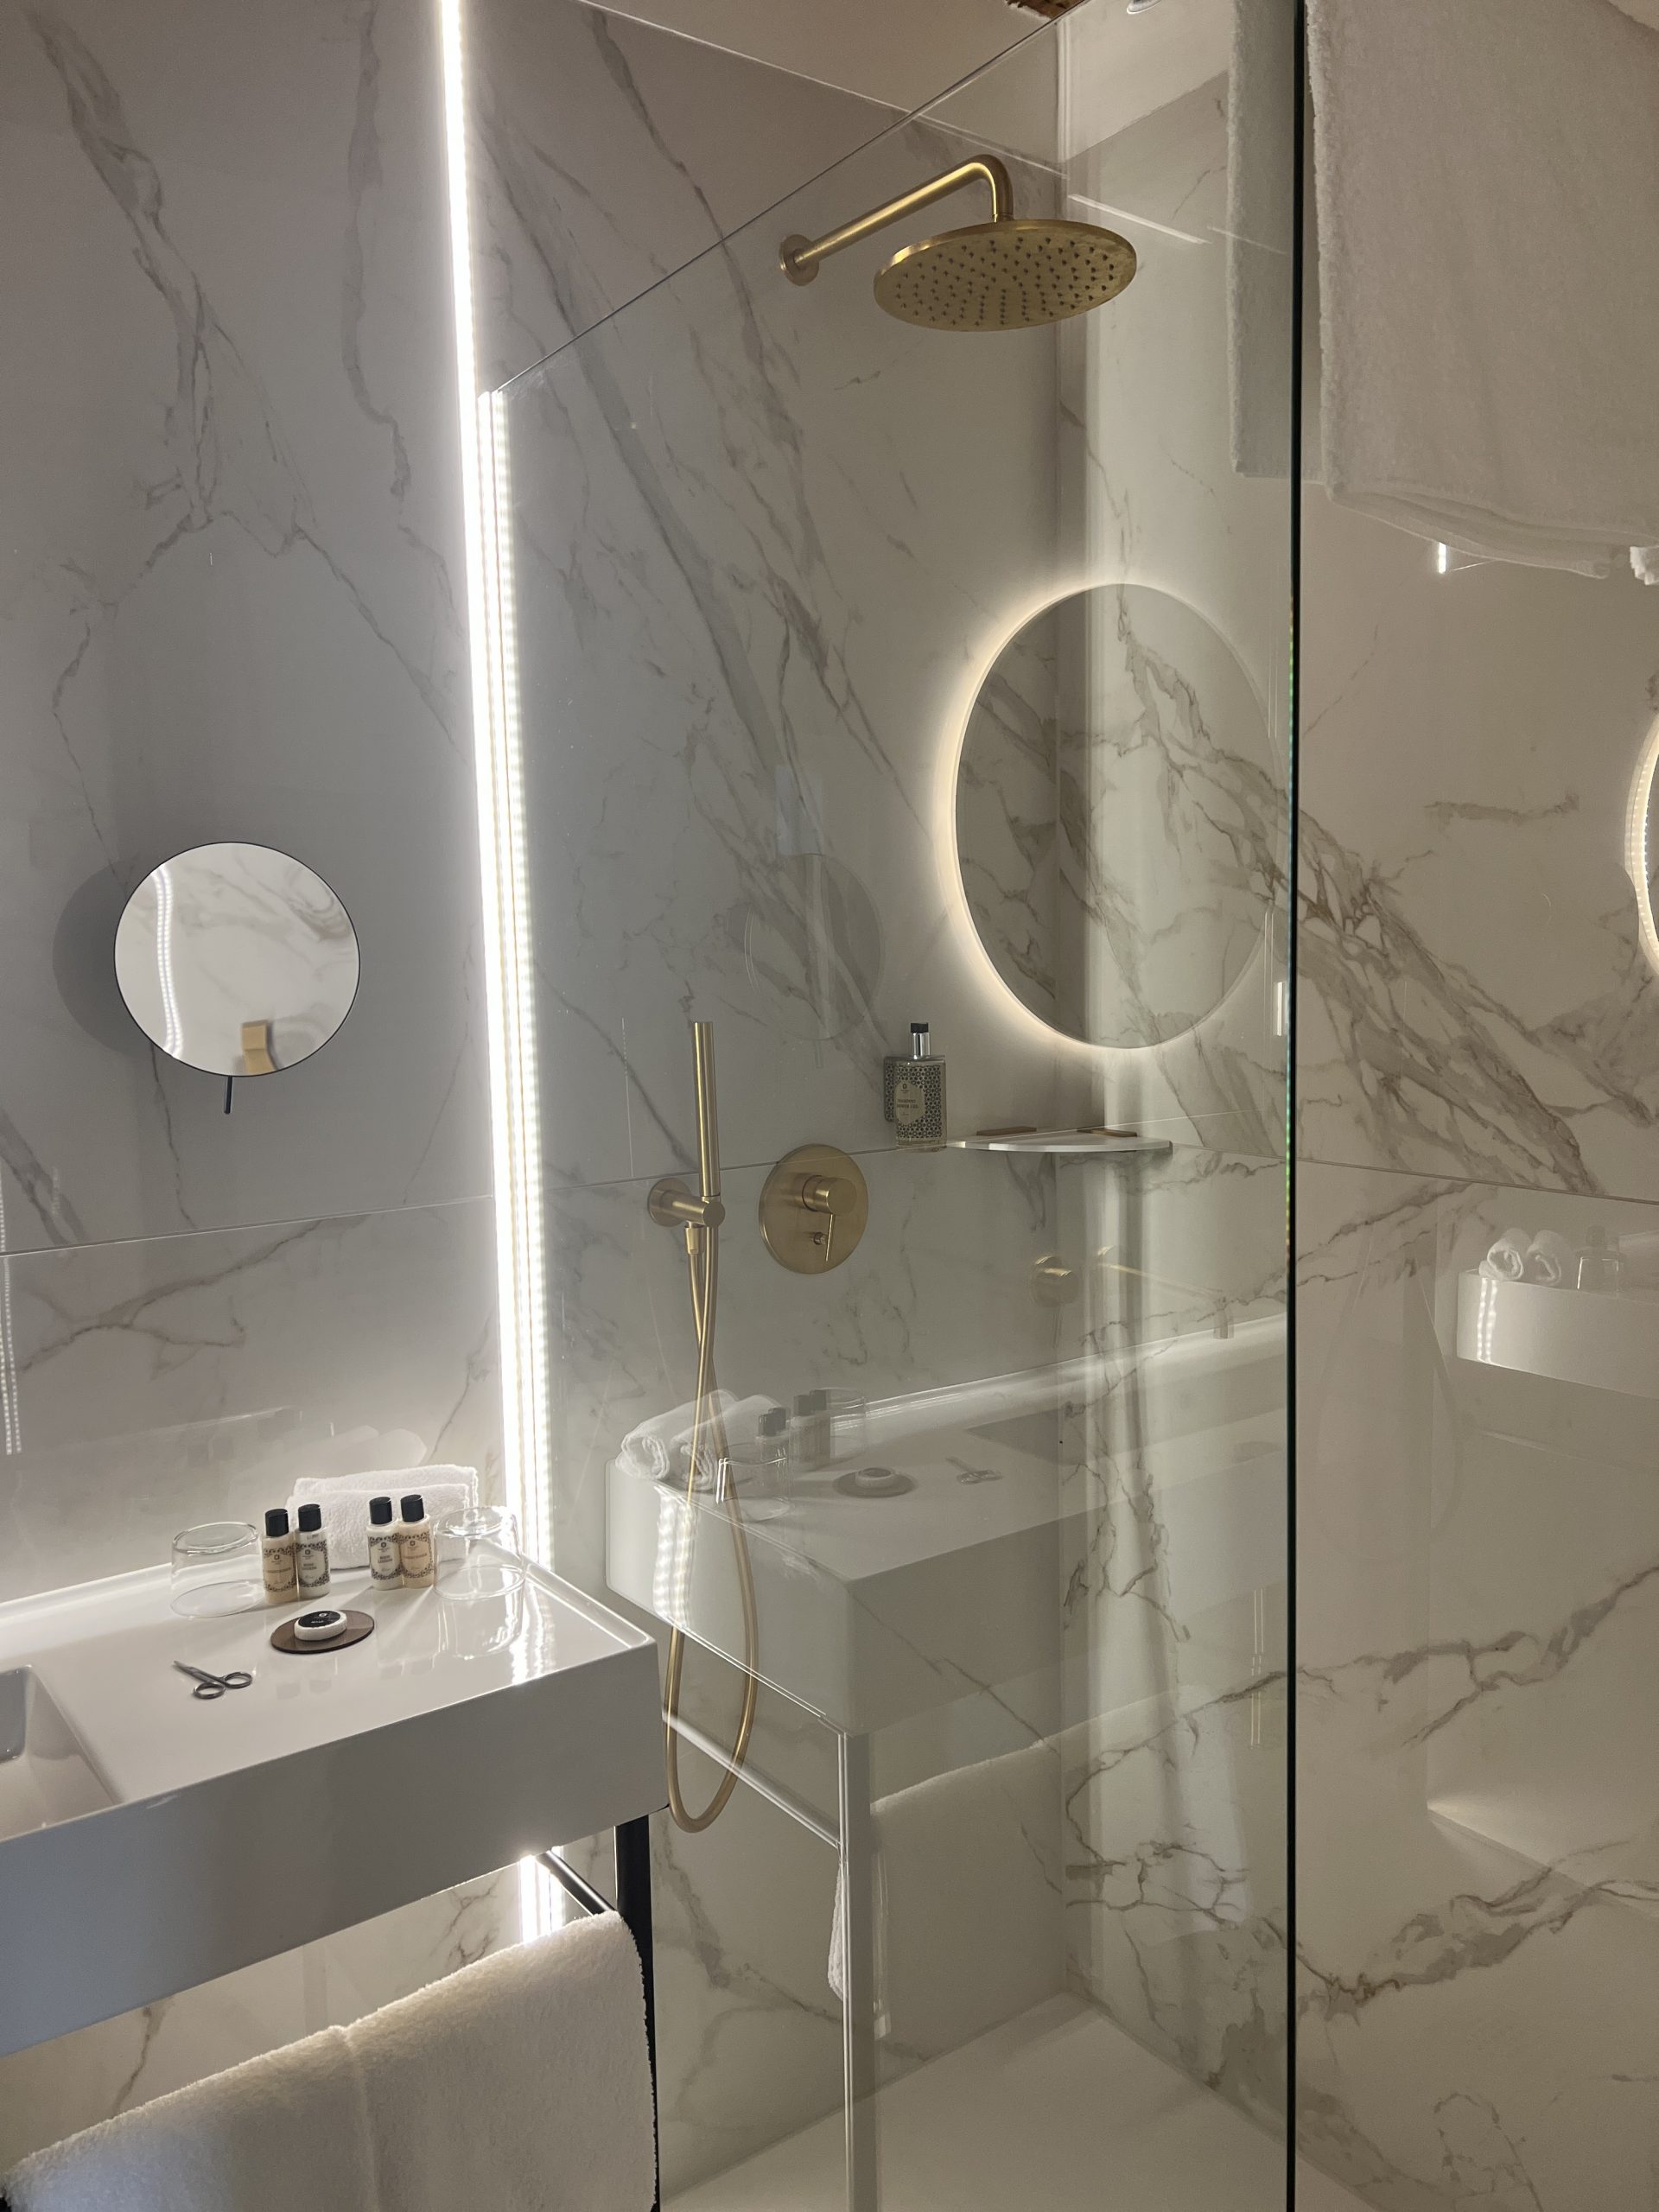 Sleek & contemporary styling in the ensuite bathroom